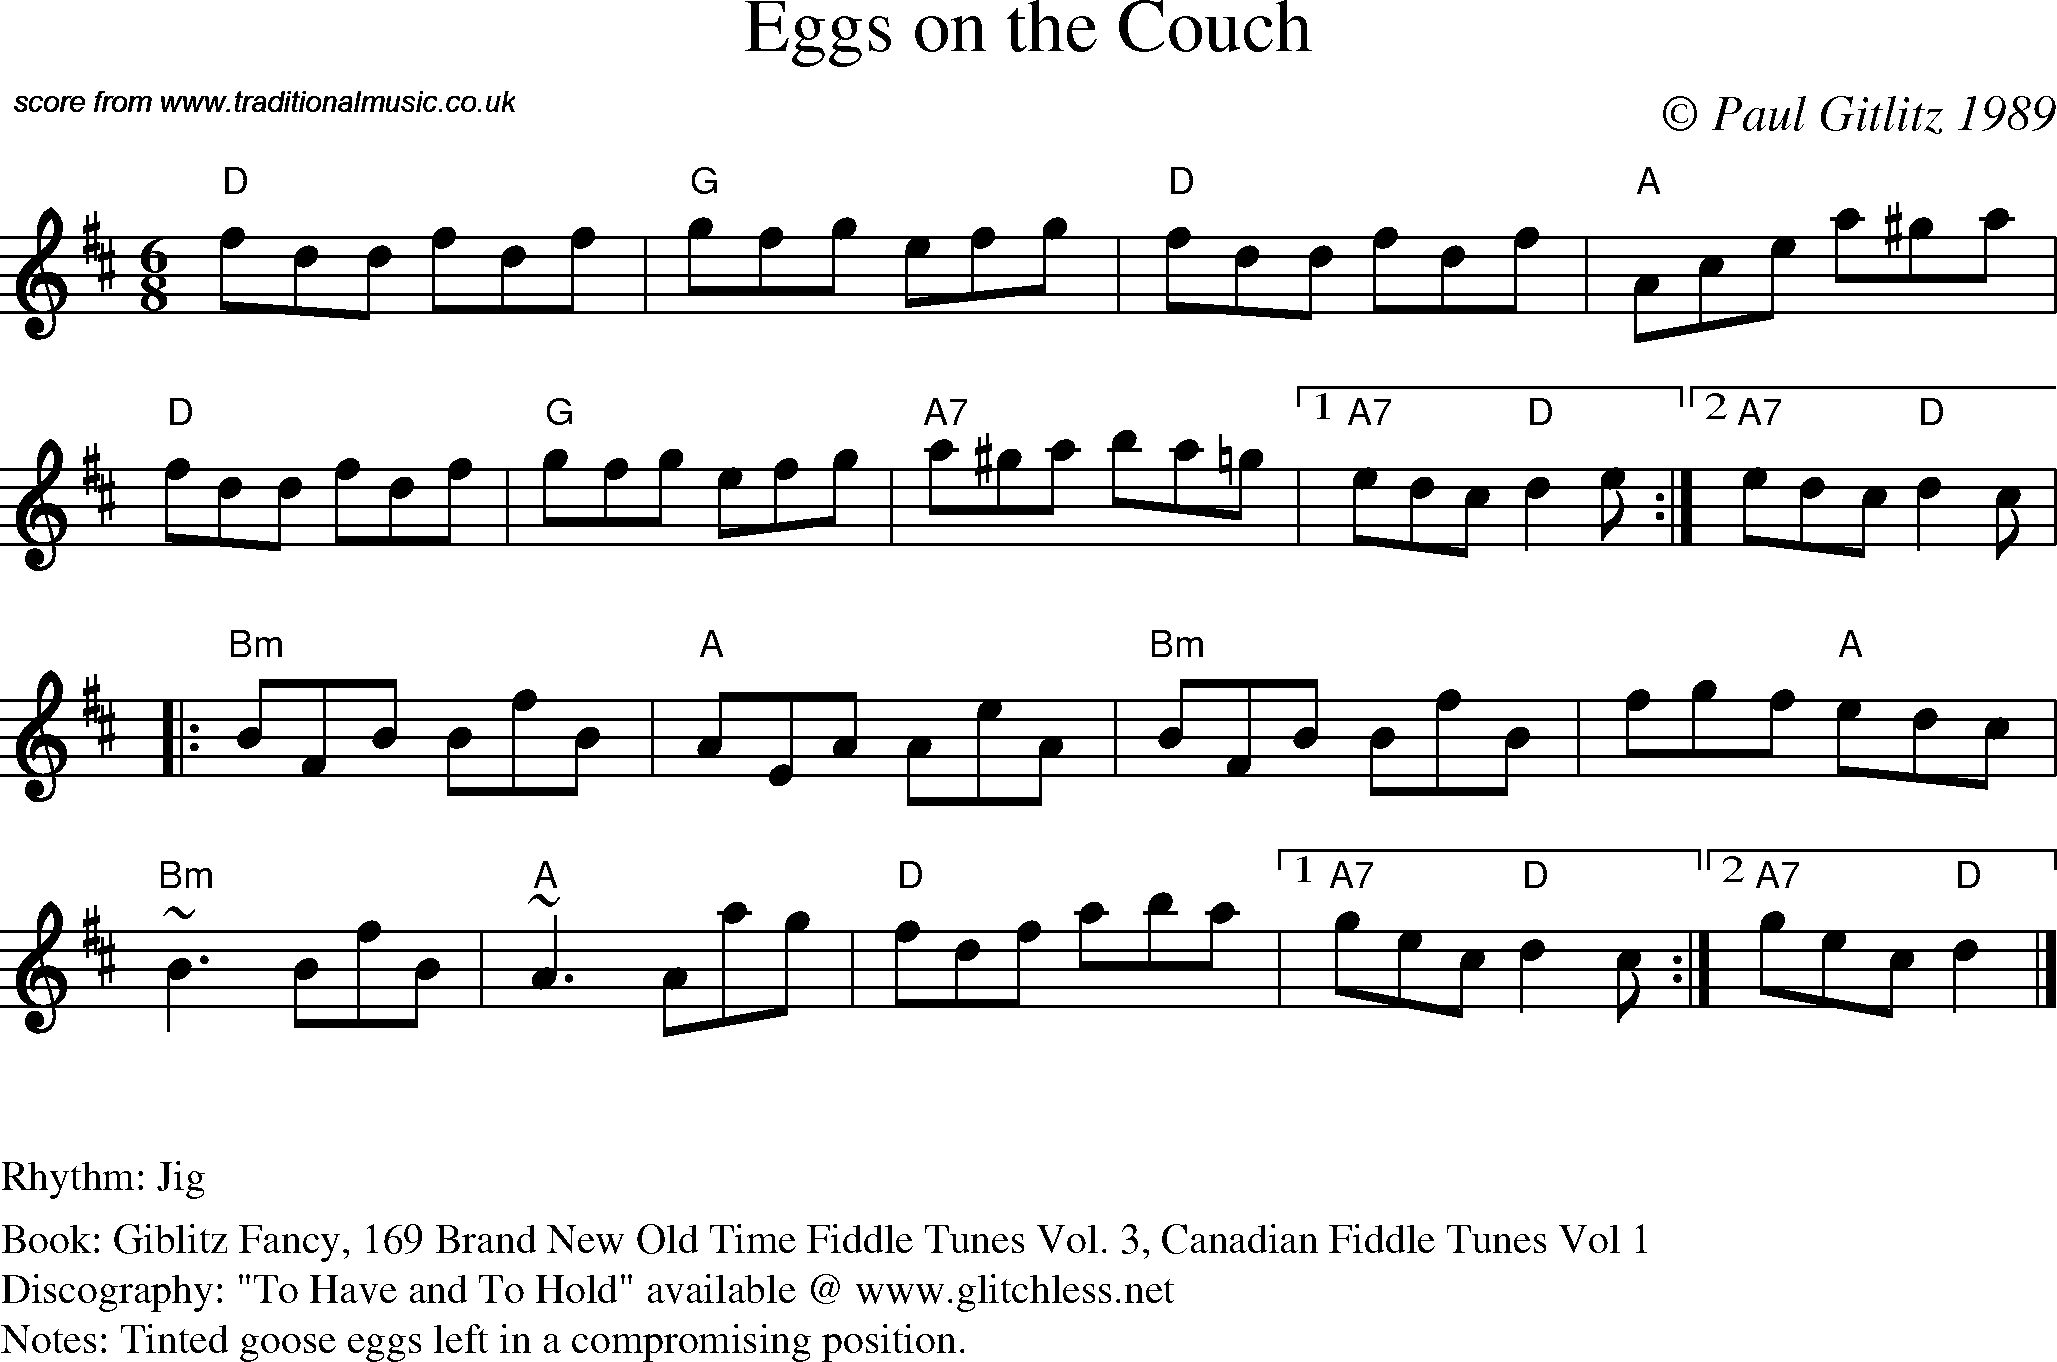 Sheet Music Score for Jig - Eggs on the Couch